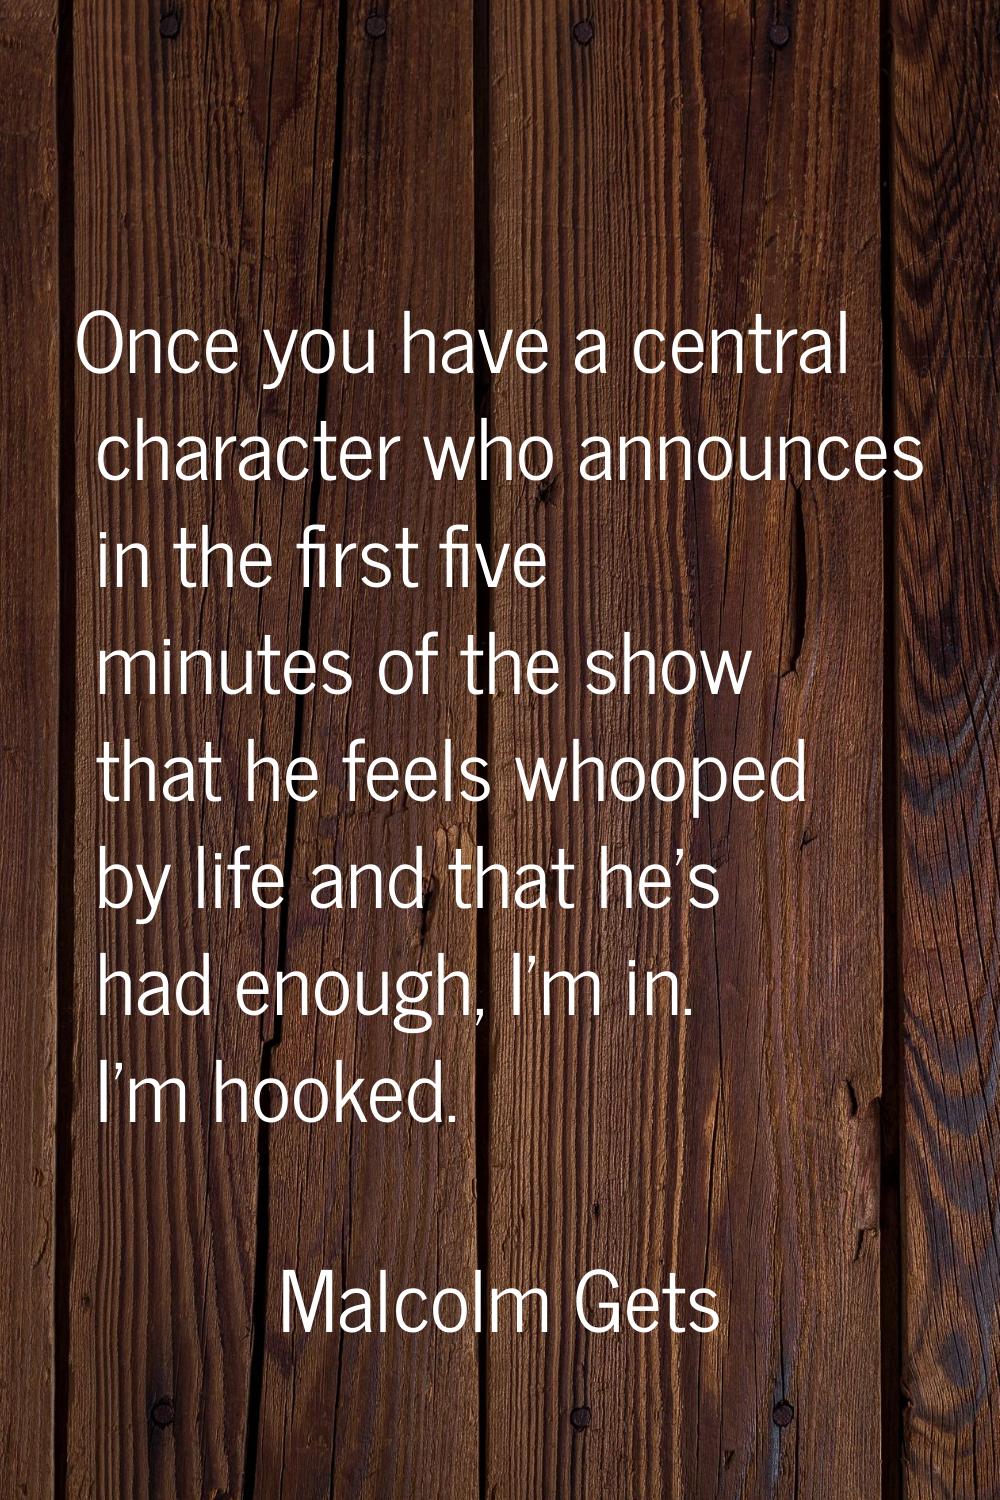 Once you have a central character who announces in the first five minutes of the show that he feels